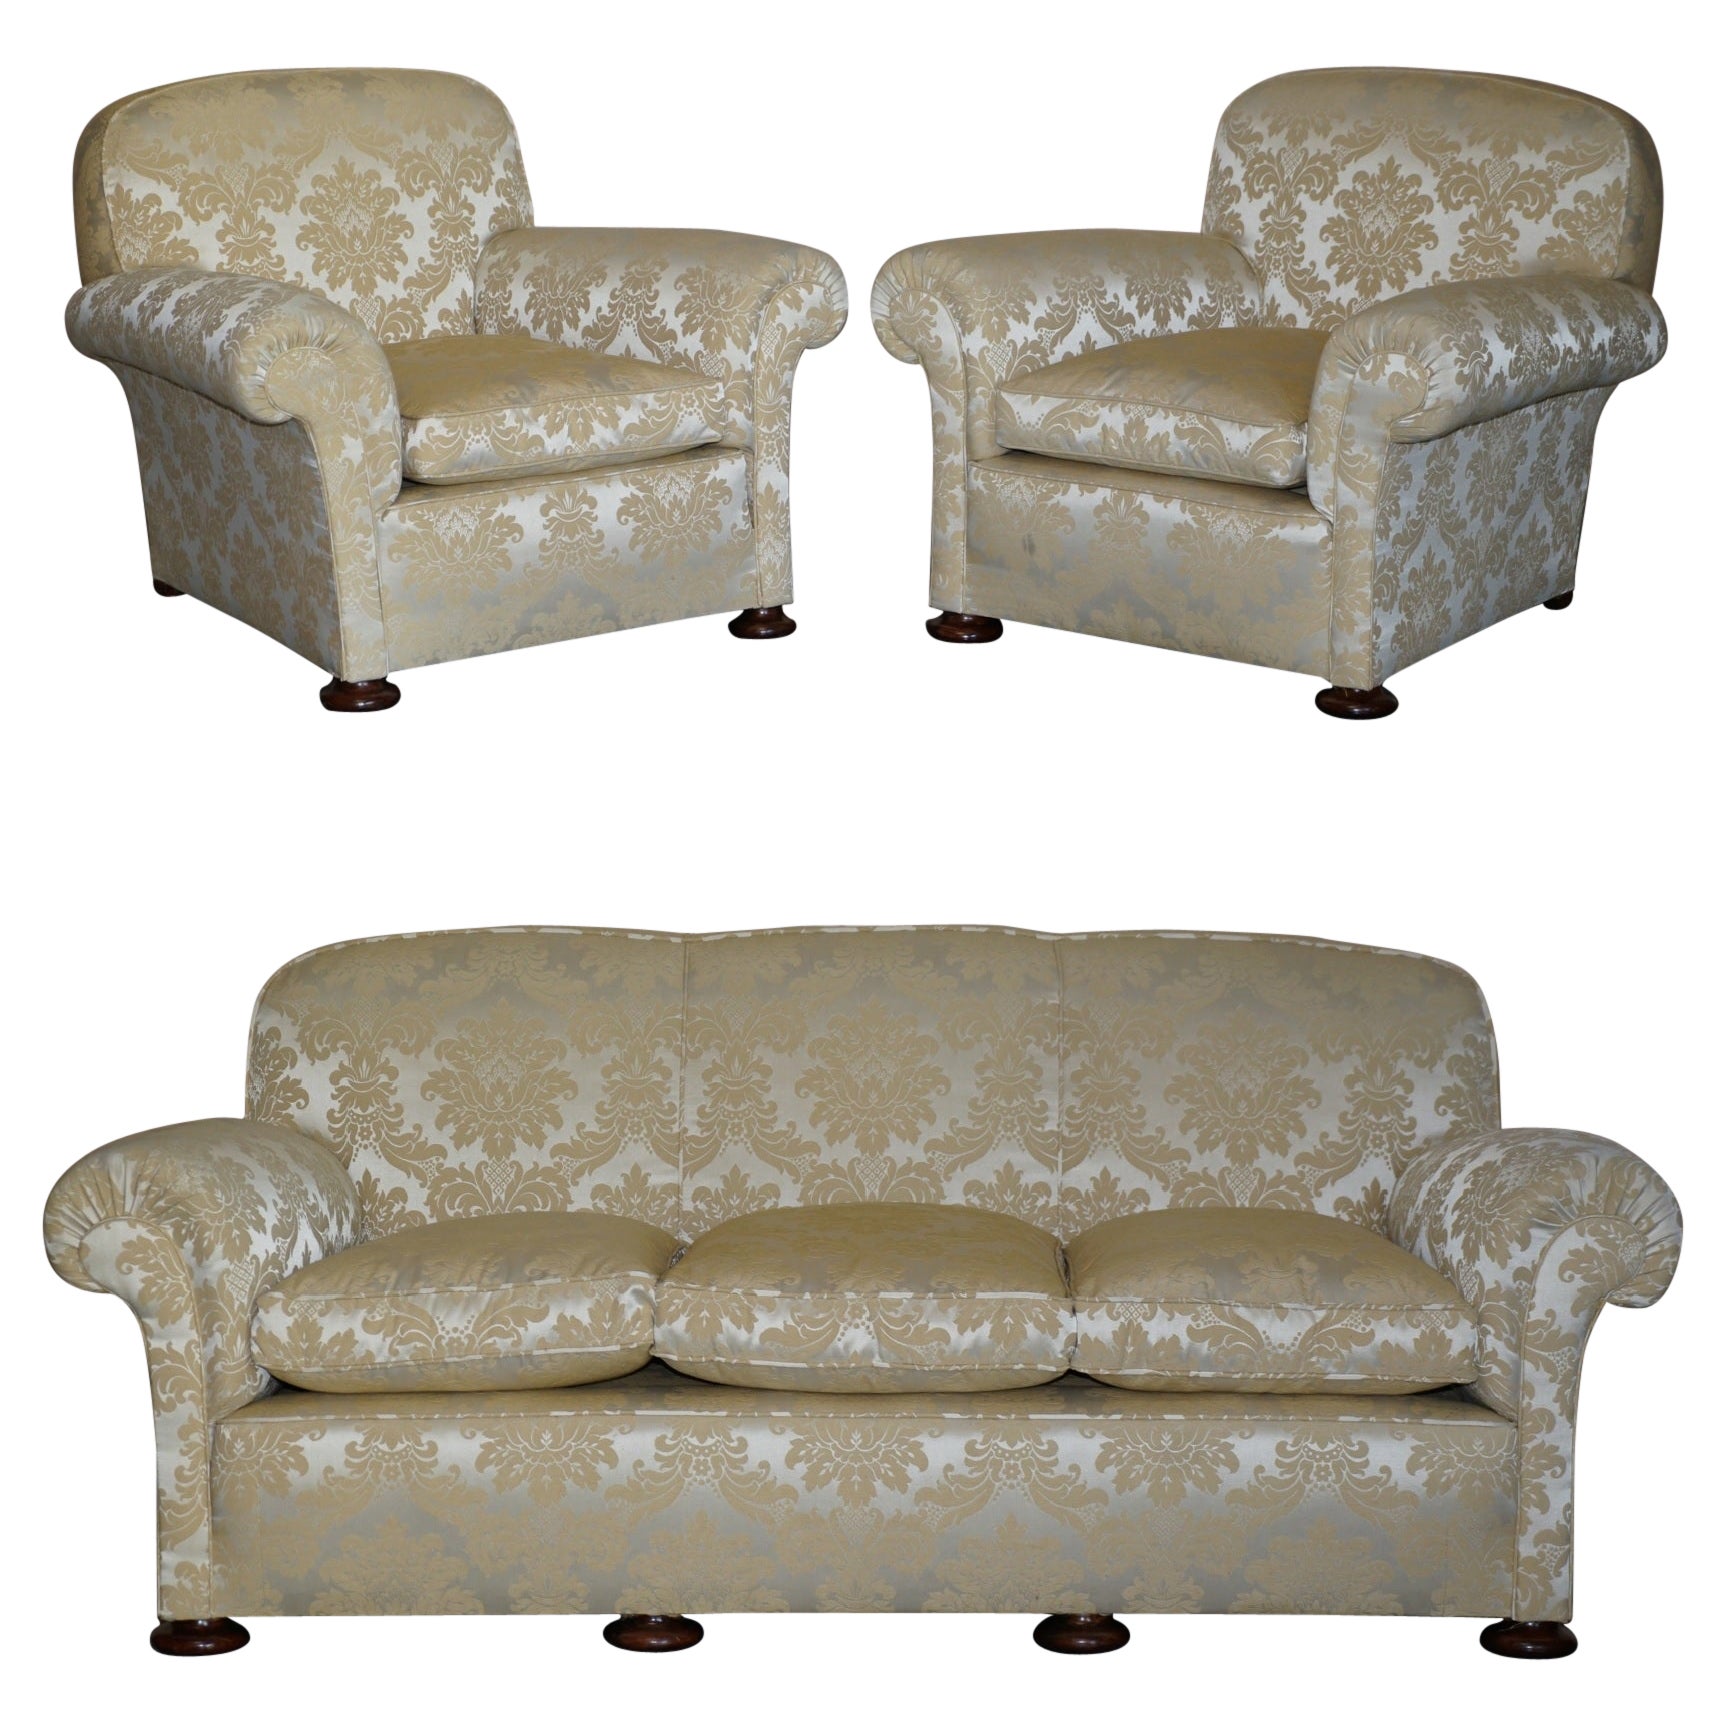 Antique Victorian Sofa & Armchair Club Suite Damask Upholstery Turned Bun Feet